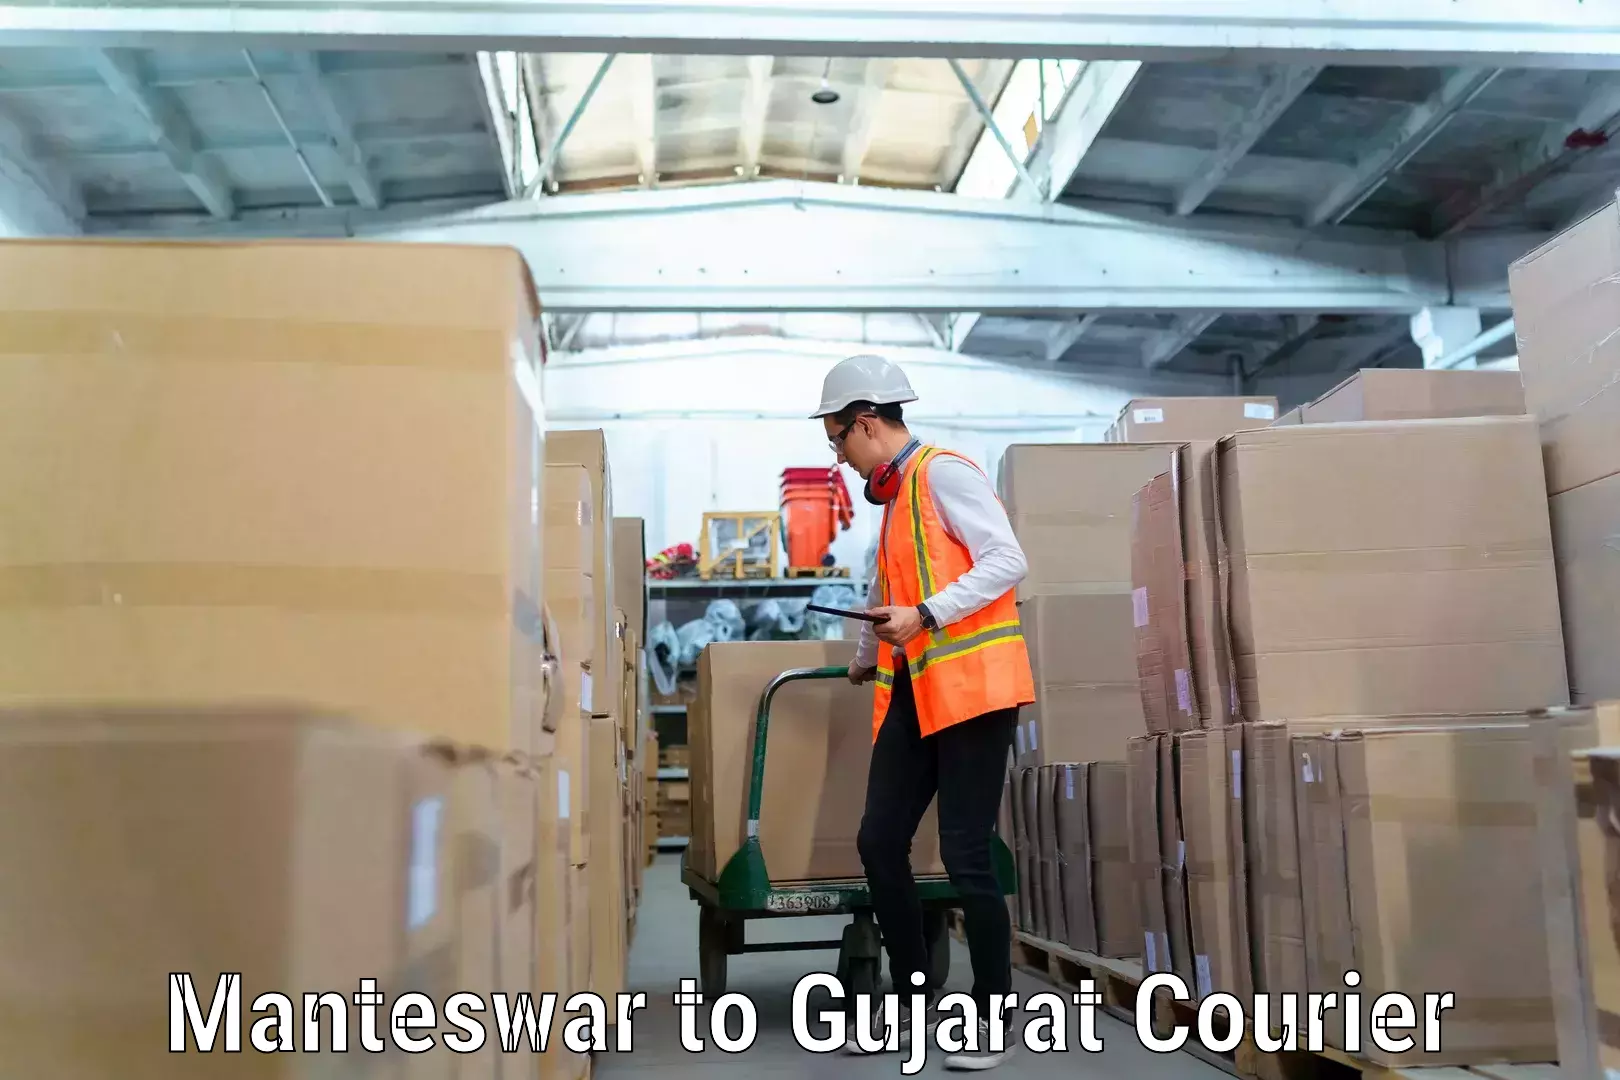 Furniture delivery service Manteswar to Gujarat